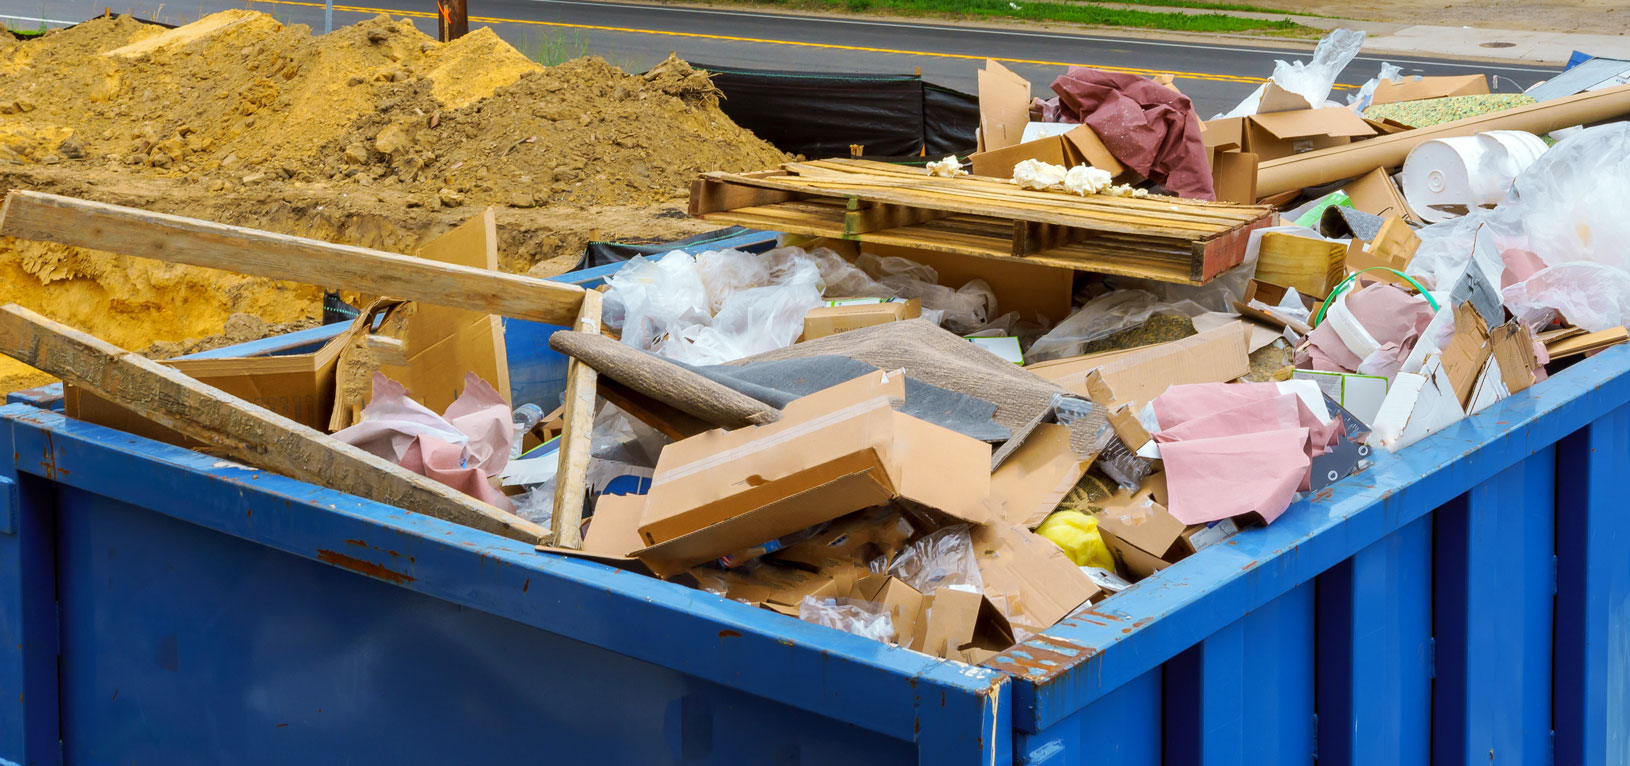 Oceanside Junk Removal, Junk Removal Services and Junk Removal Company